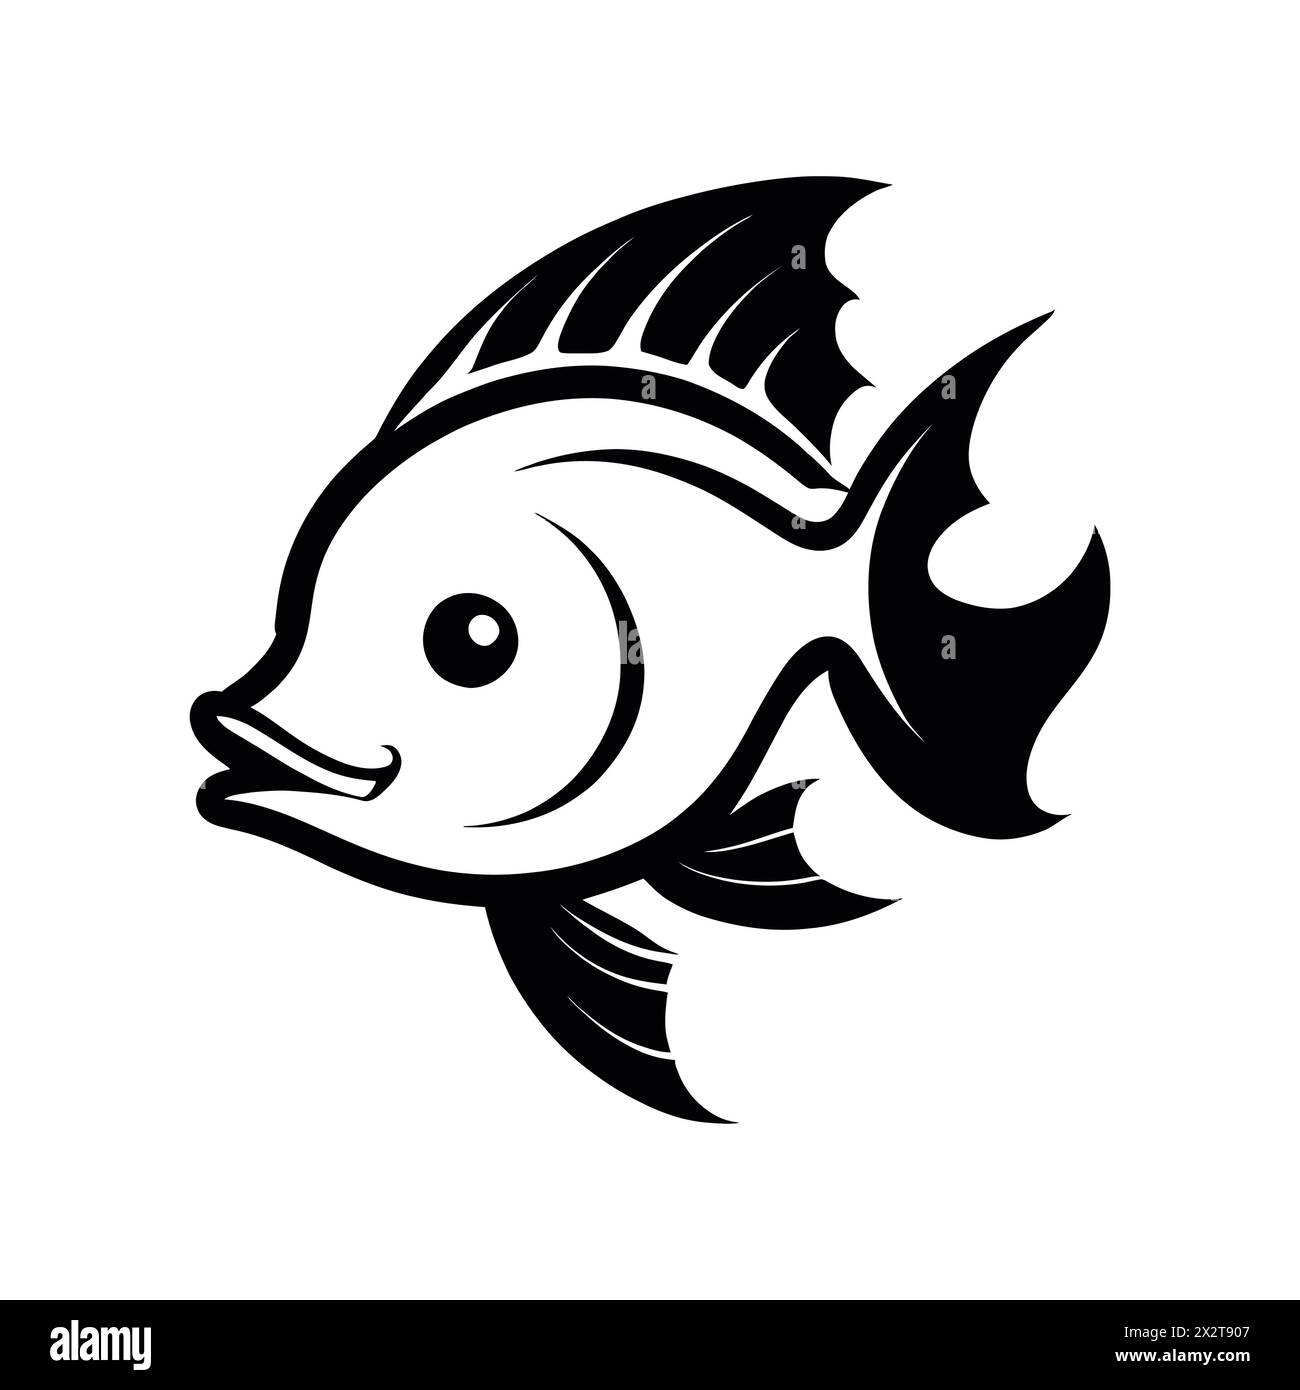 Vector image of a fish on a white background. Design element. Stock Vector